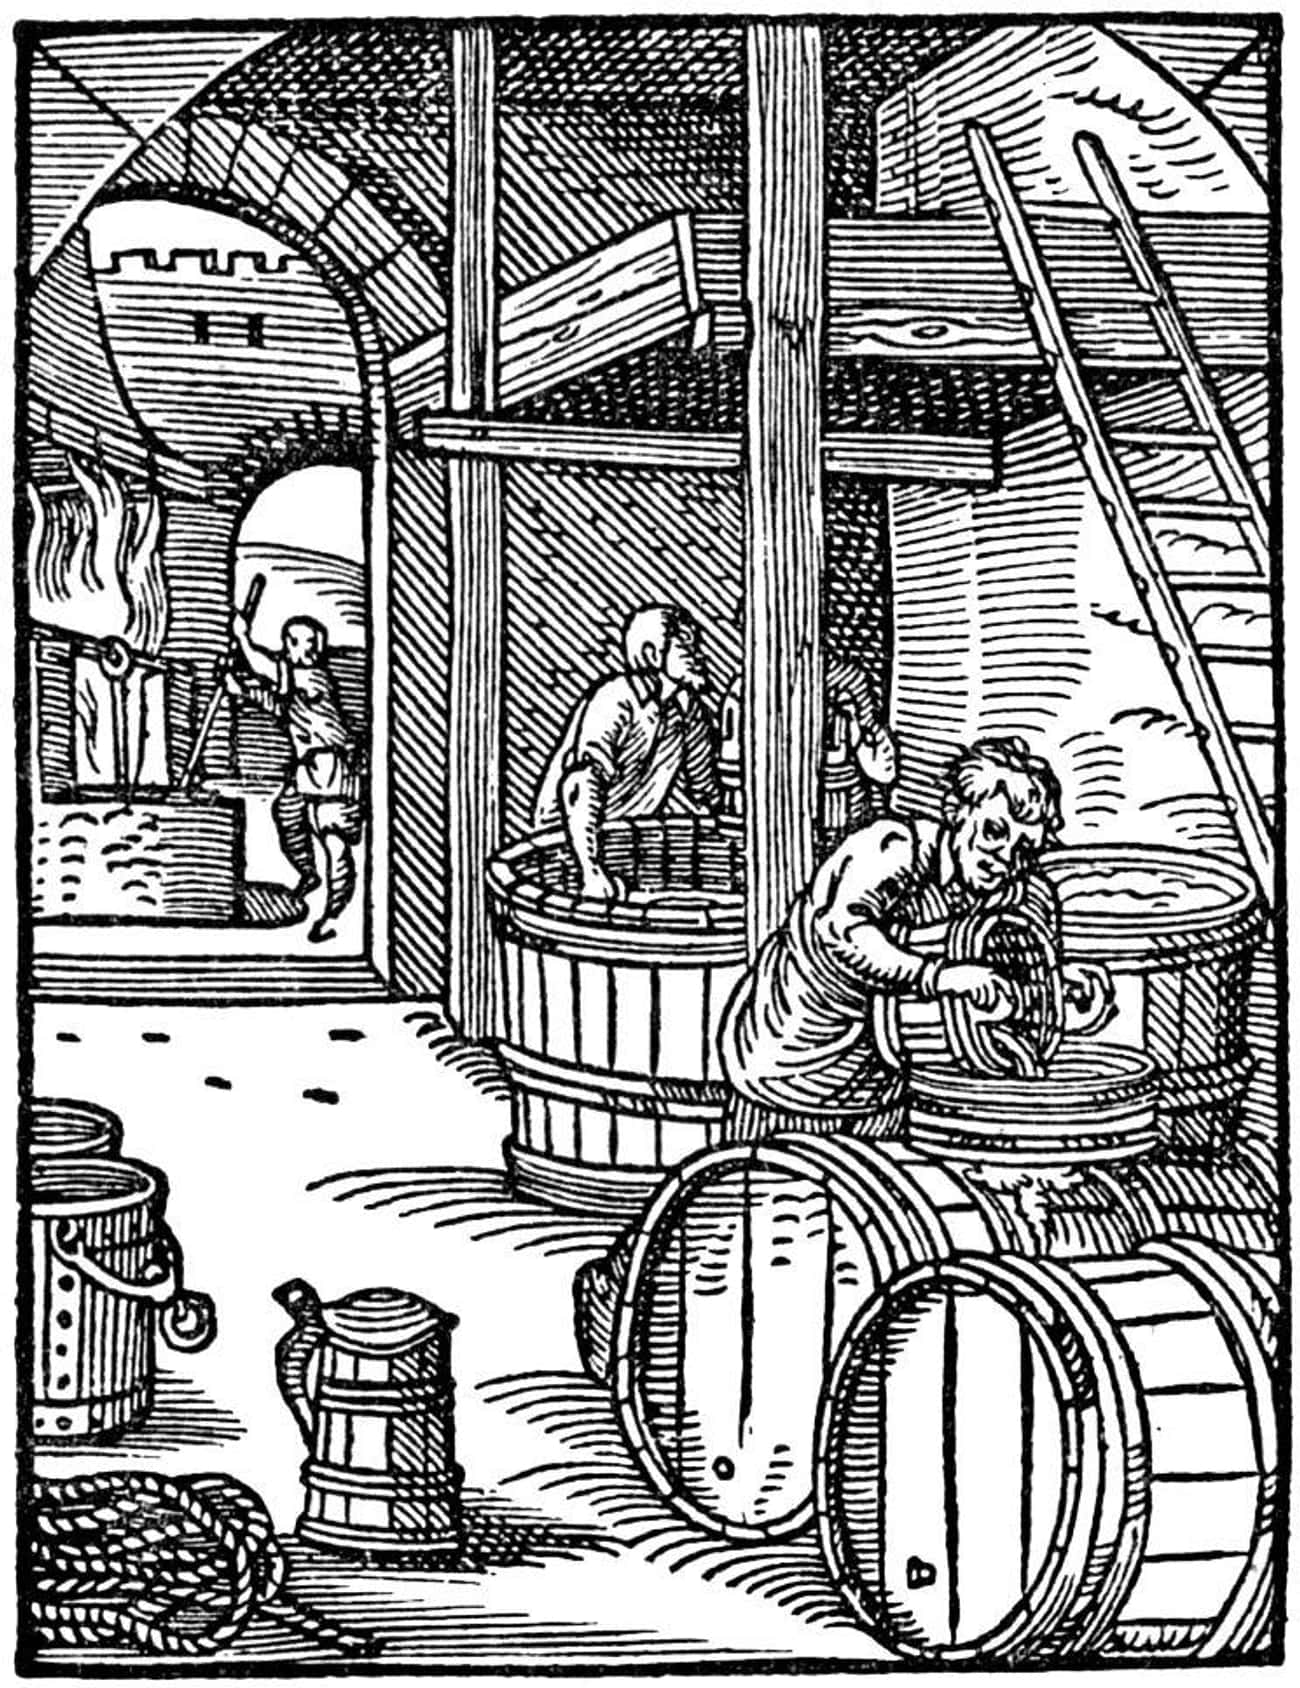 Medieval Beer Didn't Contain As Much Alcohol As Modern Beer